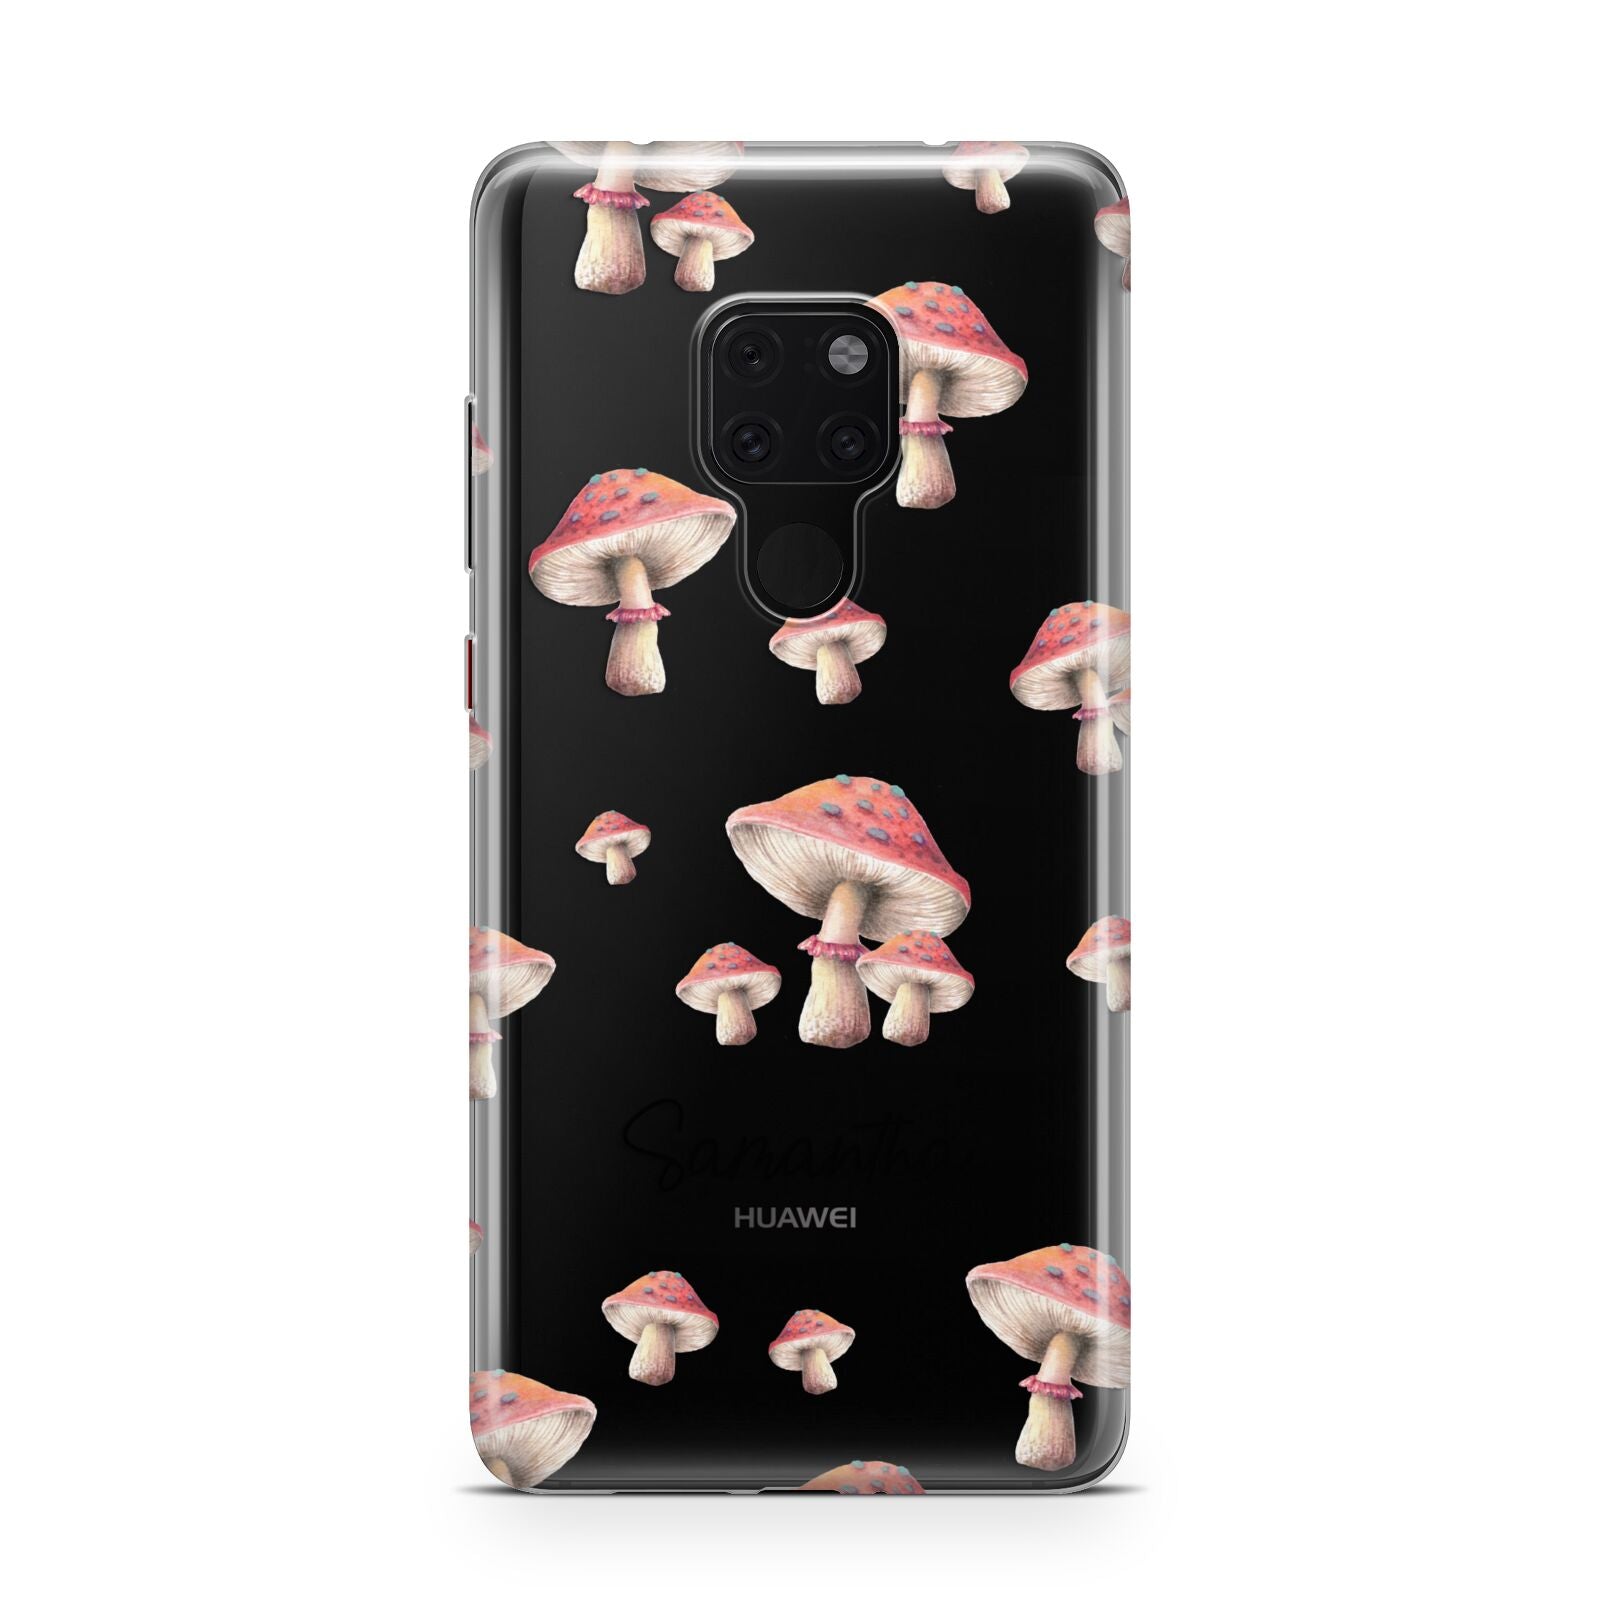 Mushroom Illustrations with Name Huawei Mate 20 Phone Case